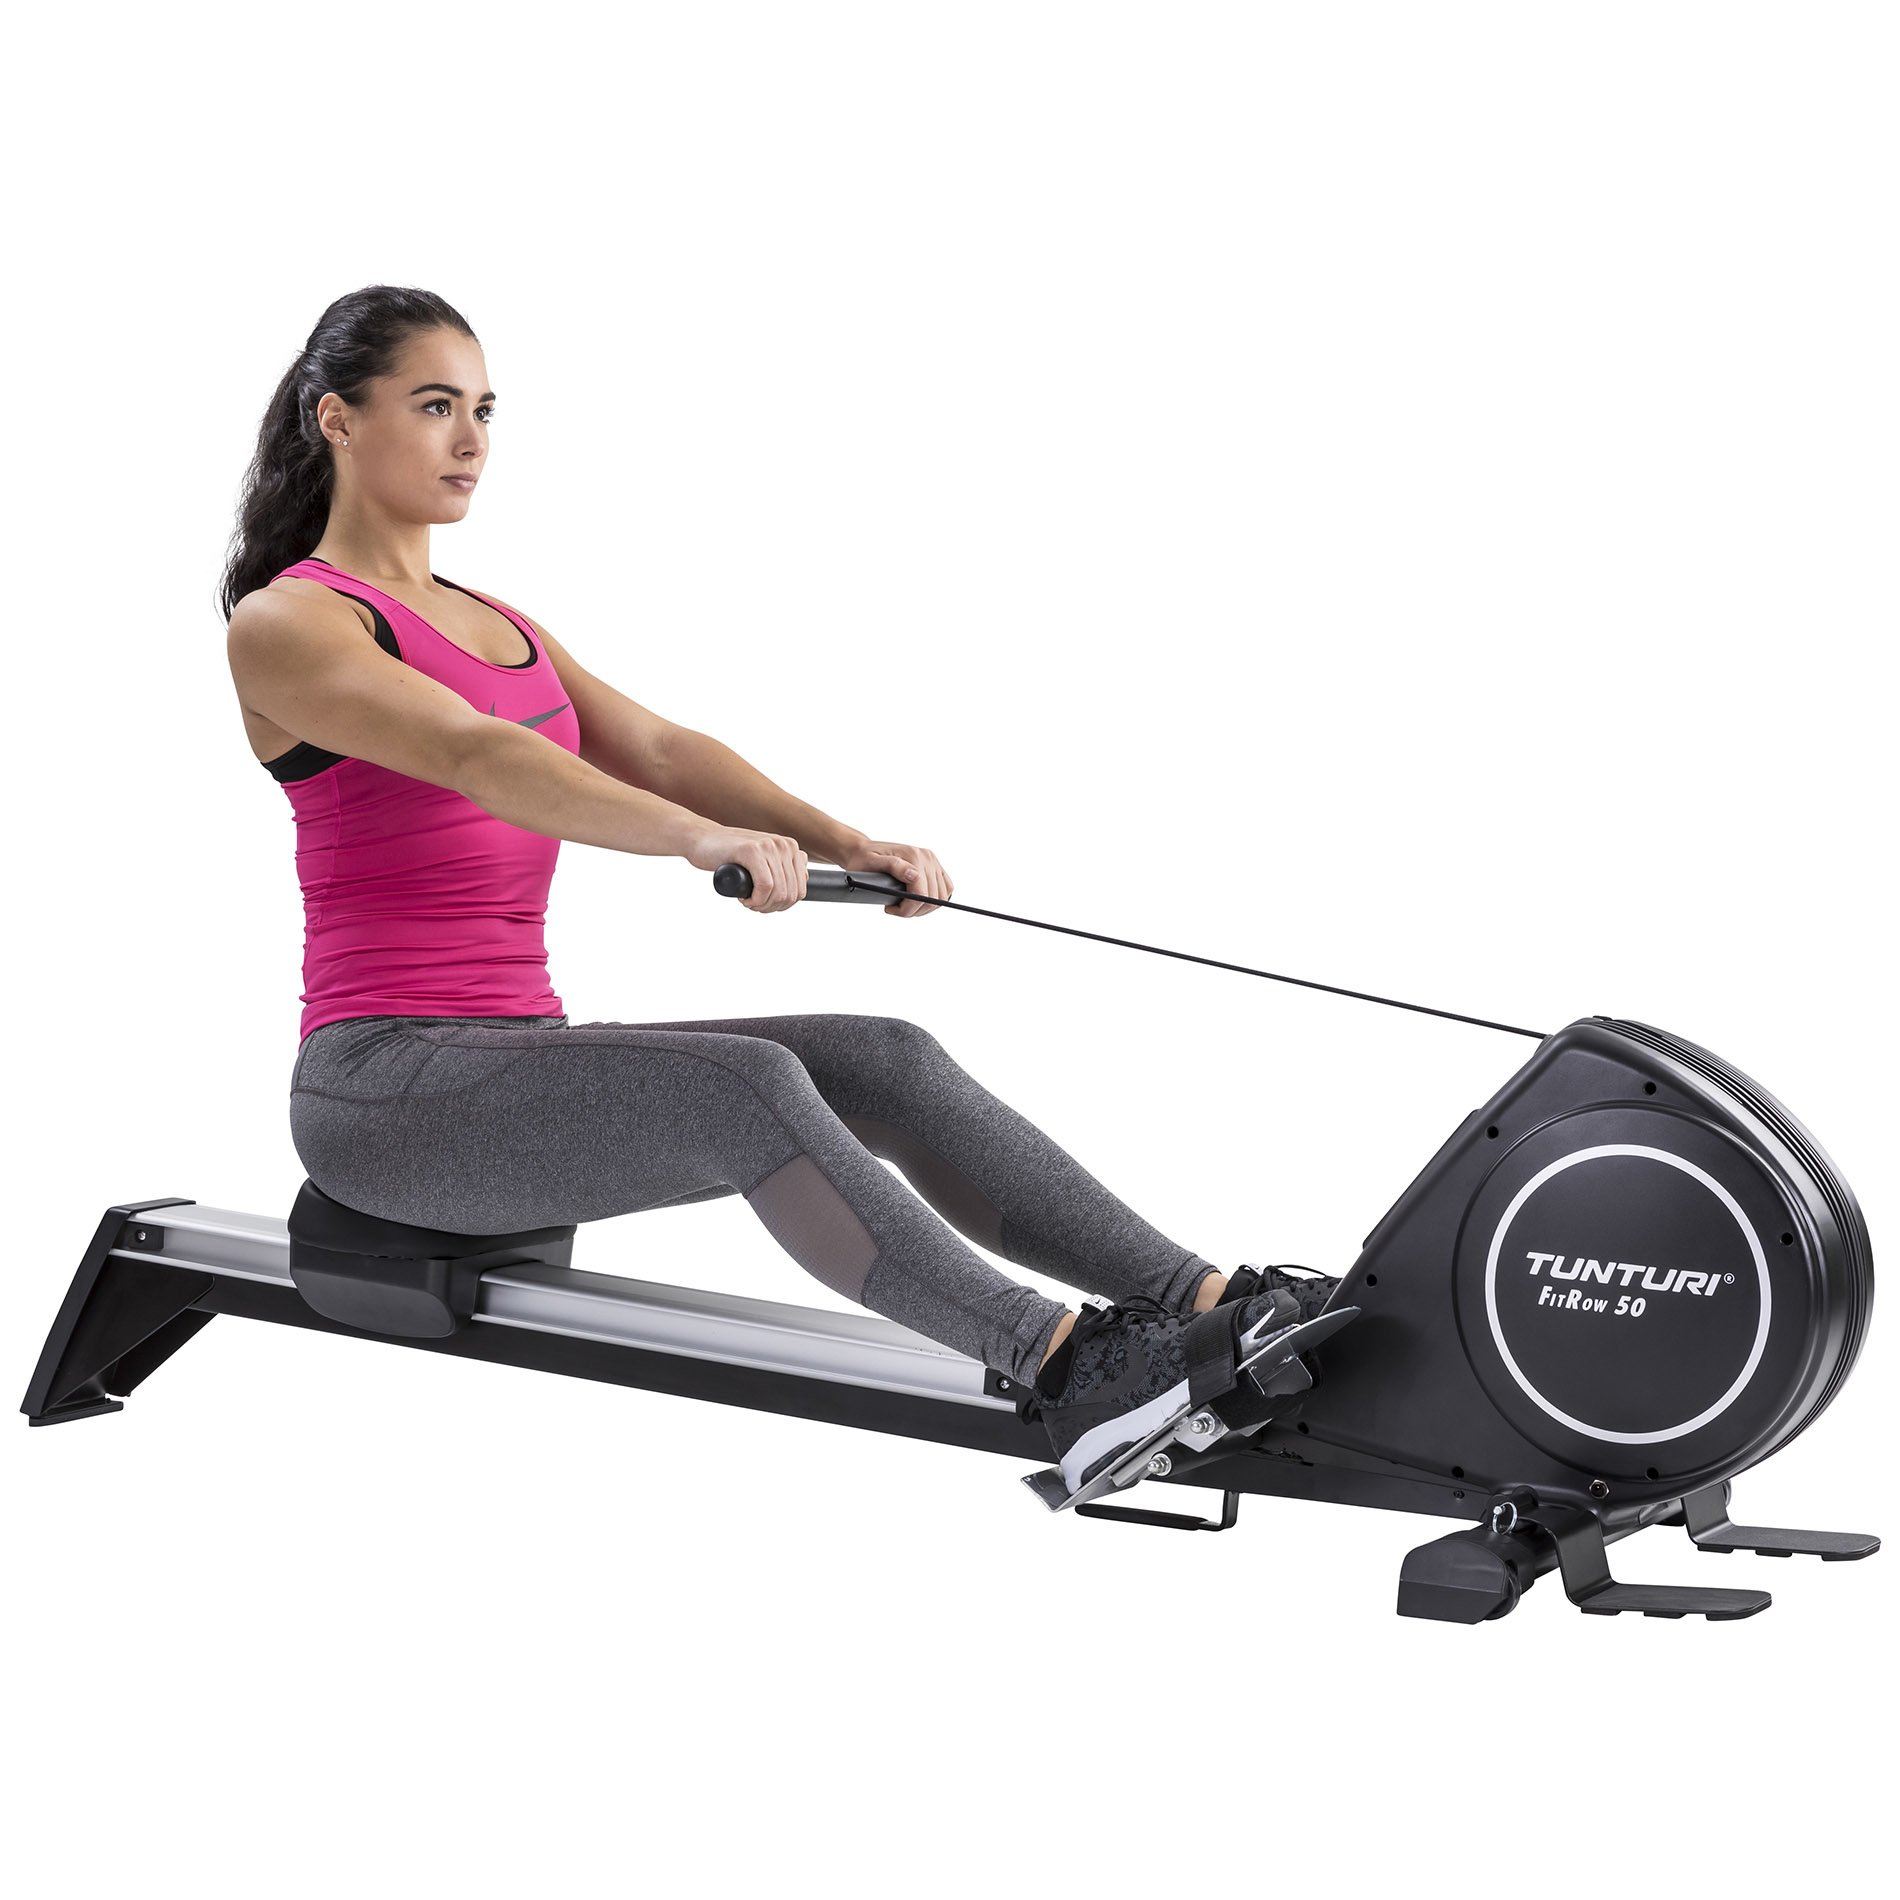 Rowing Machine FitRow 50 - Rower - 16 Resistance levels - Easy to move -  Tunturi New Fitness B.V.